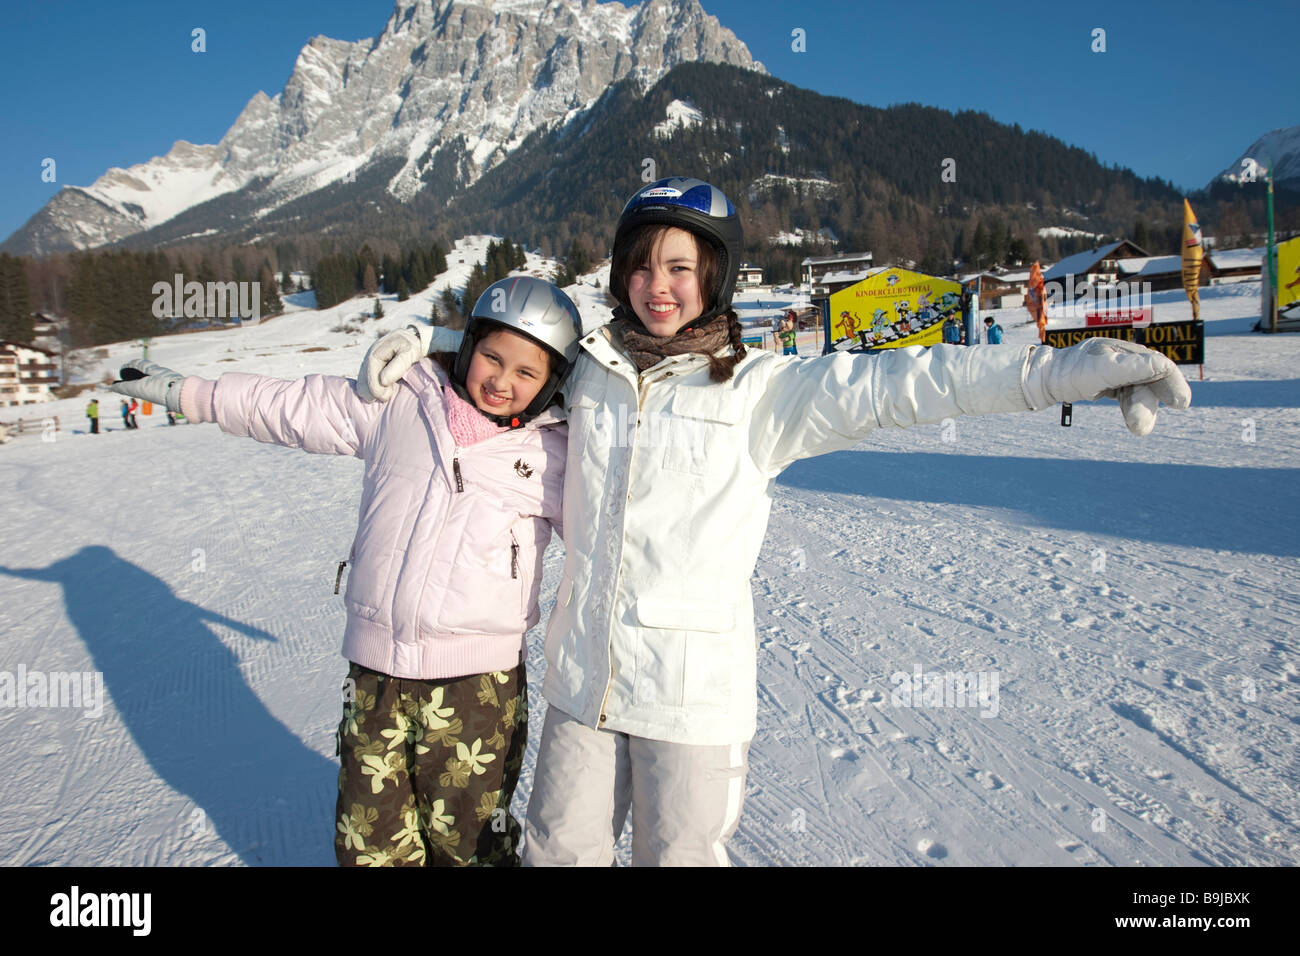 Two female skiers standing happily on the ski slopes in front of Zugspitze mountain, Tyrol, Austria, Europe Stock Photo